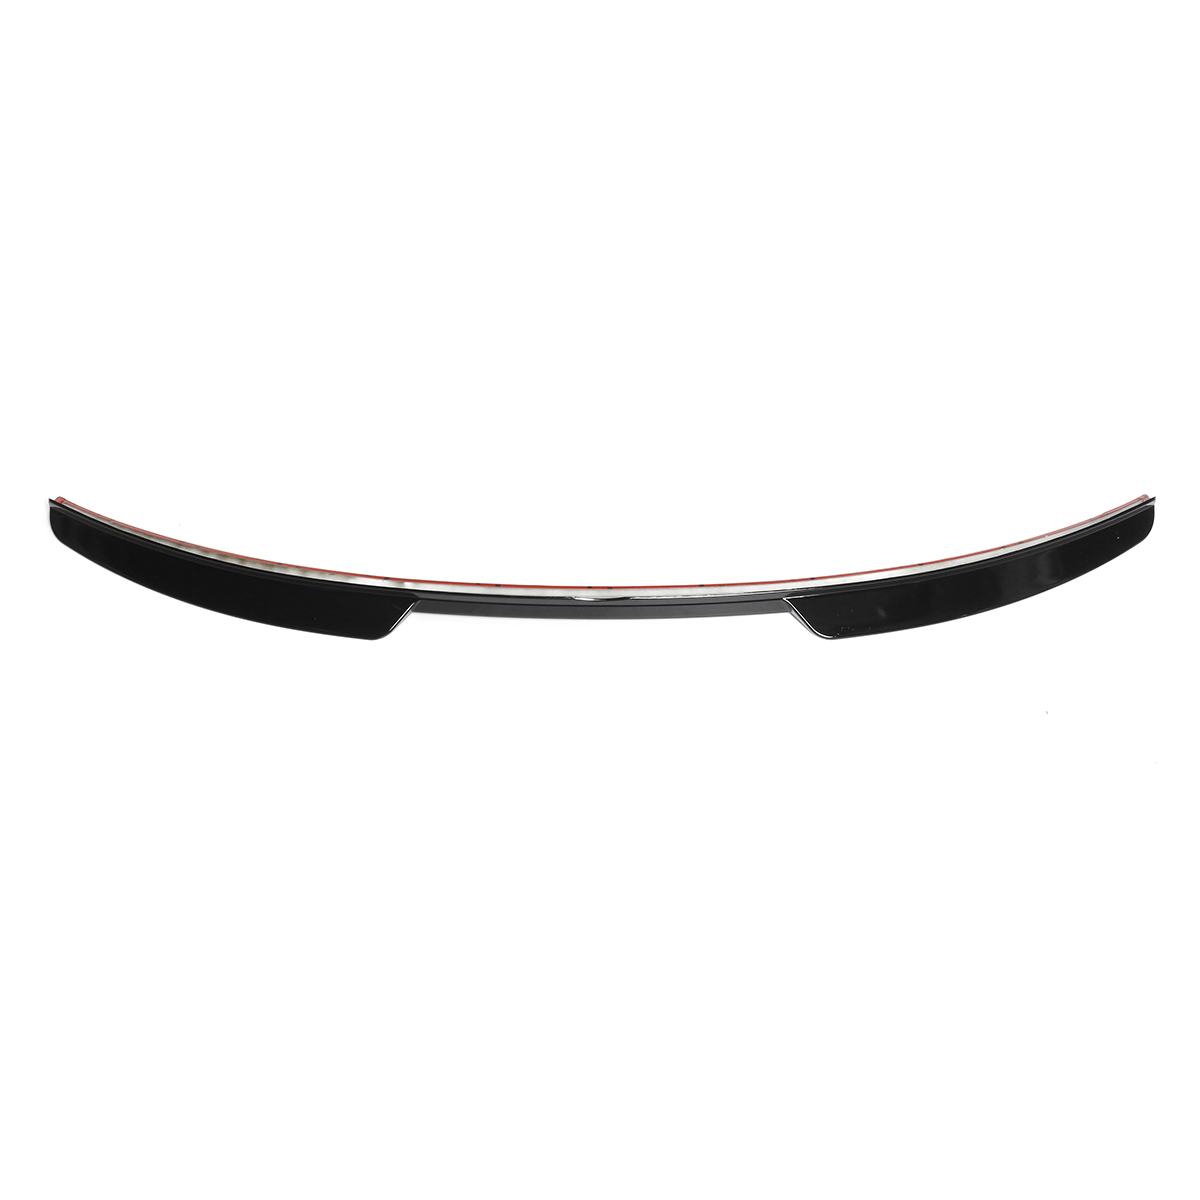 M4-Style-Gloss-Black-Rear-Tail-Trunk-Spoiler-Wing-Lip-For-Toyota-Corolla-2020-1722473